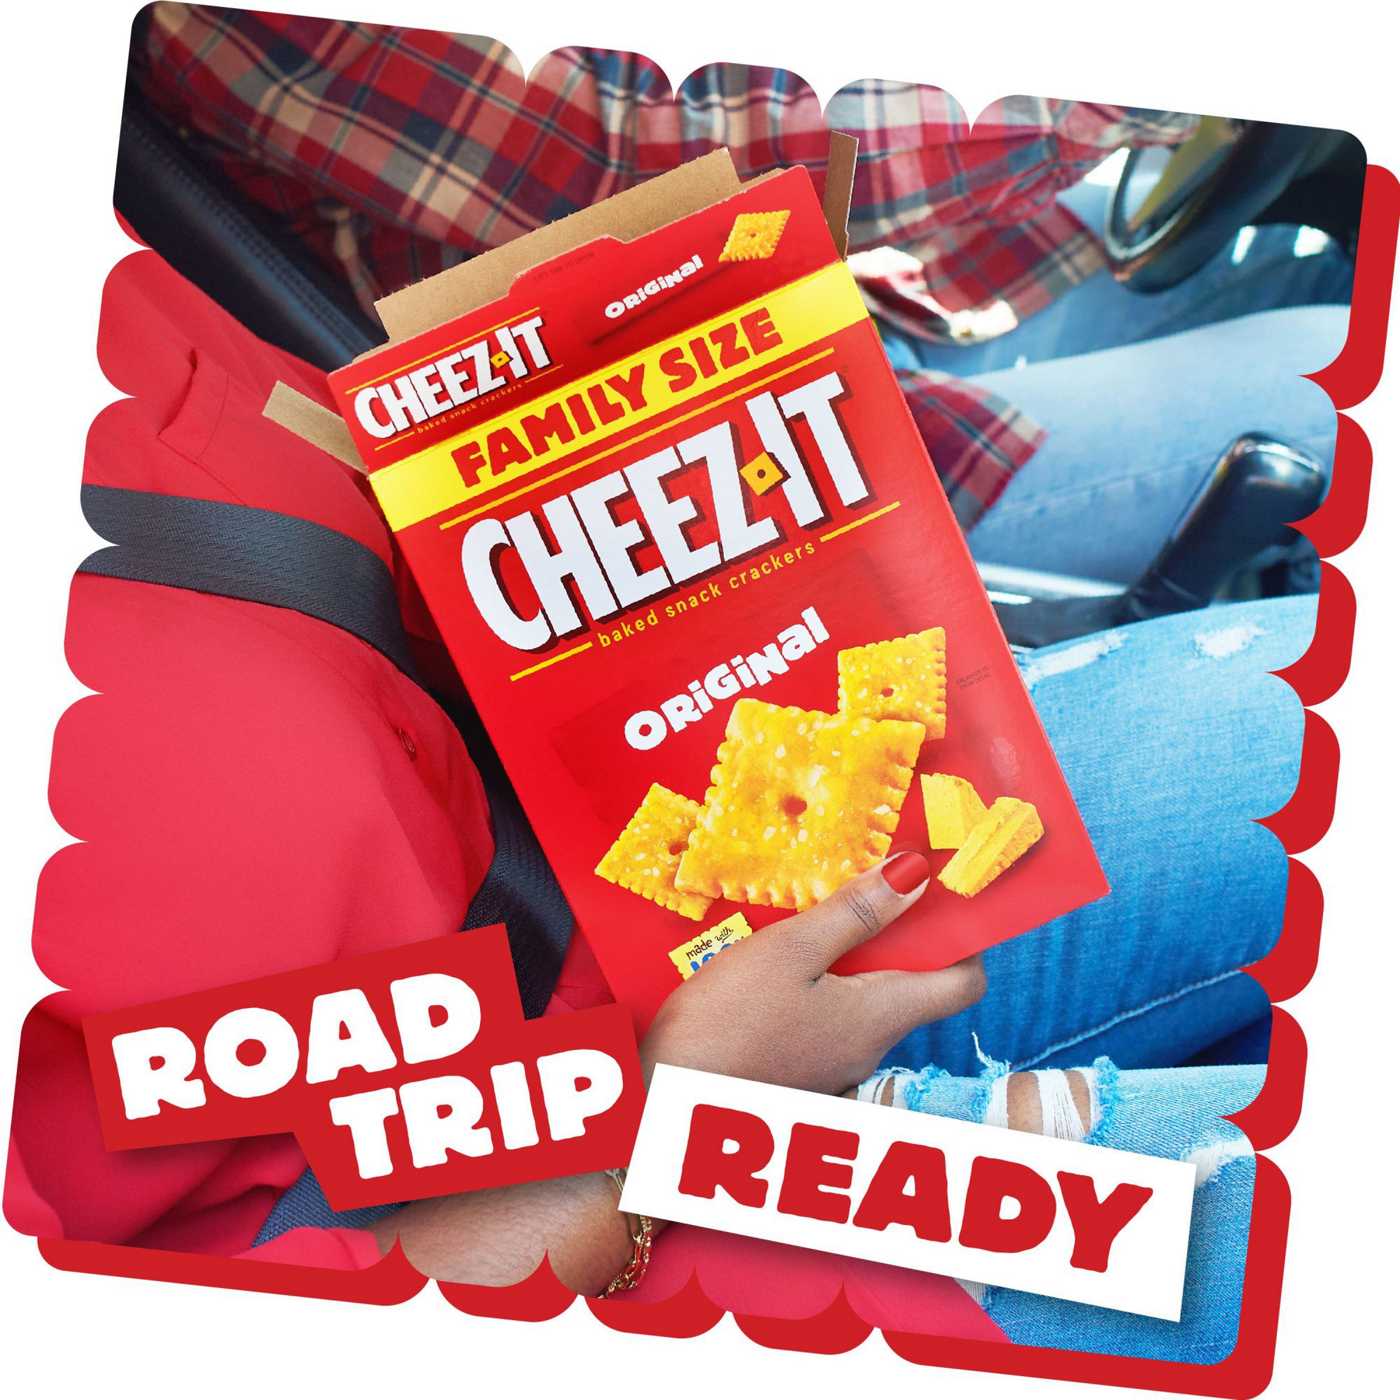 Cheez-It Original Cheese Crackers; image 3 of 6